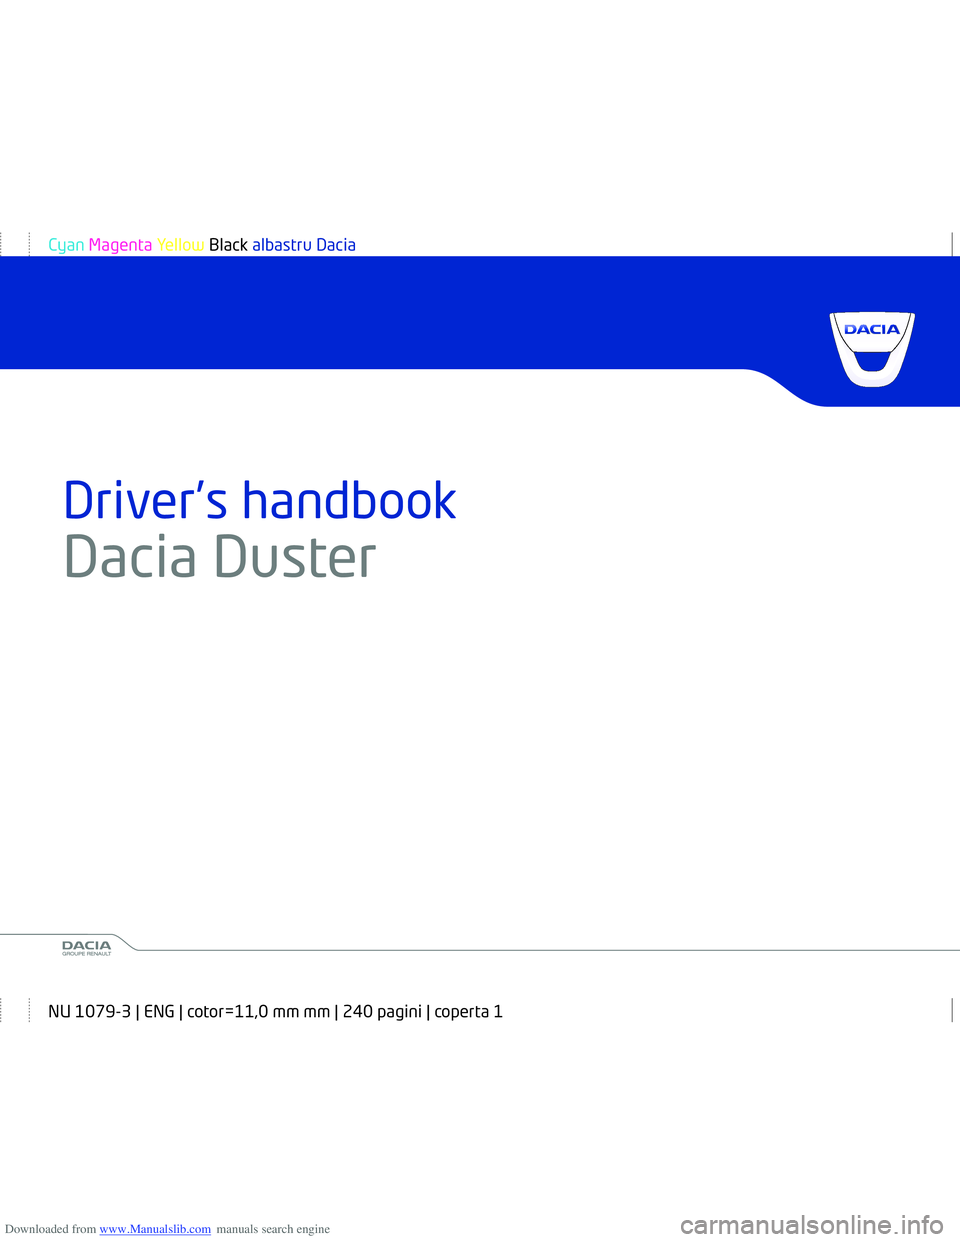 DACIA DUSTER 2017  Owners Manual Downloaded from www.Manualslib.com manuals search engine www.daciagroup.com
Driver’s handbook
Dacia  Duster        
Ref 999101781R / édition anglaiseNU 1079-3 - 07/2014
Cyan Magenta Yellow Black al